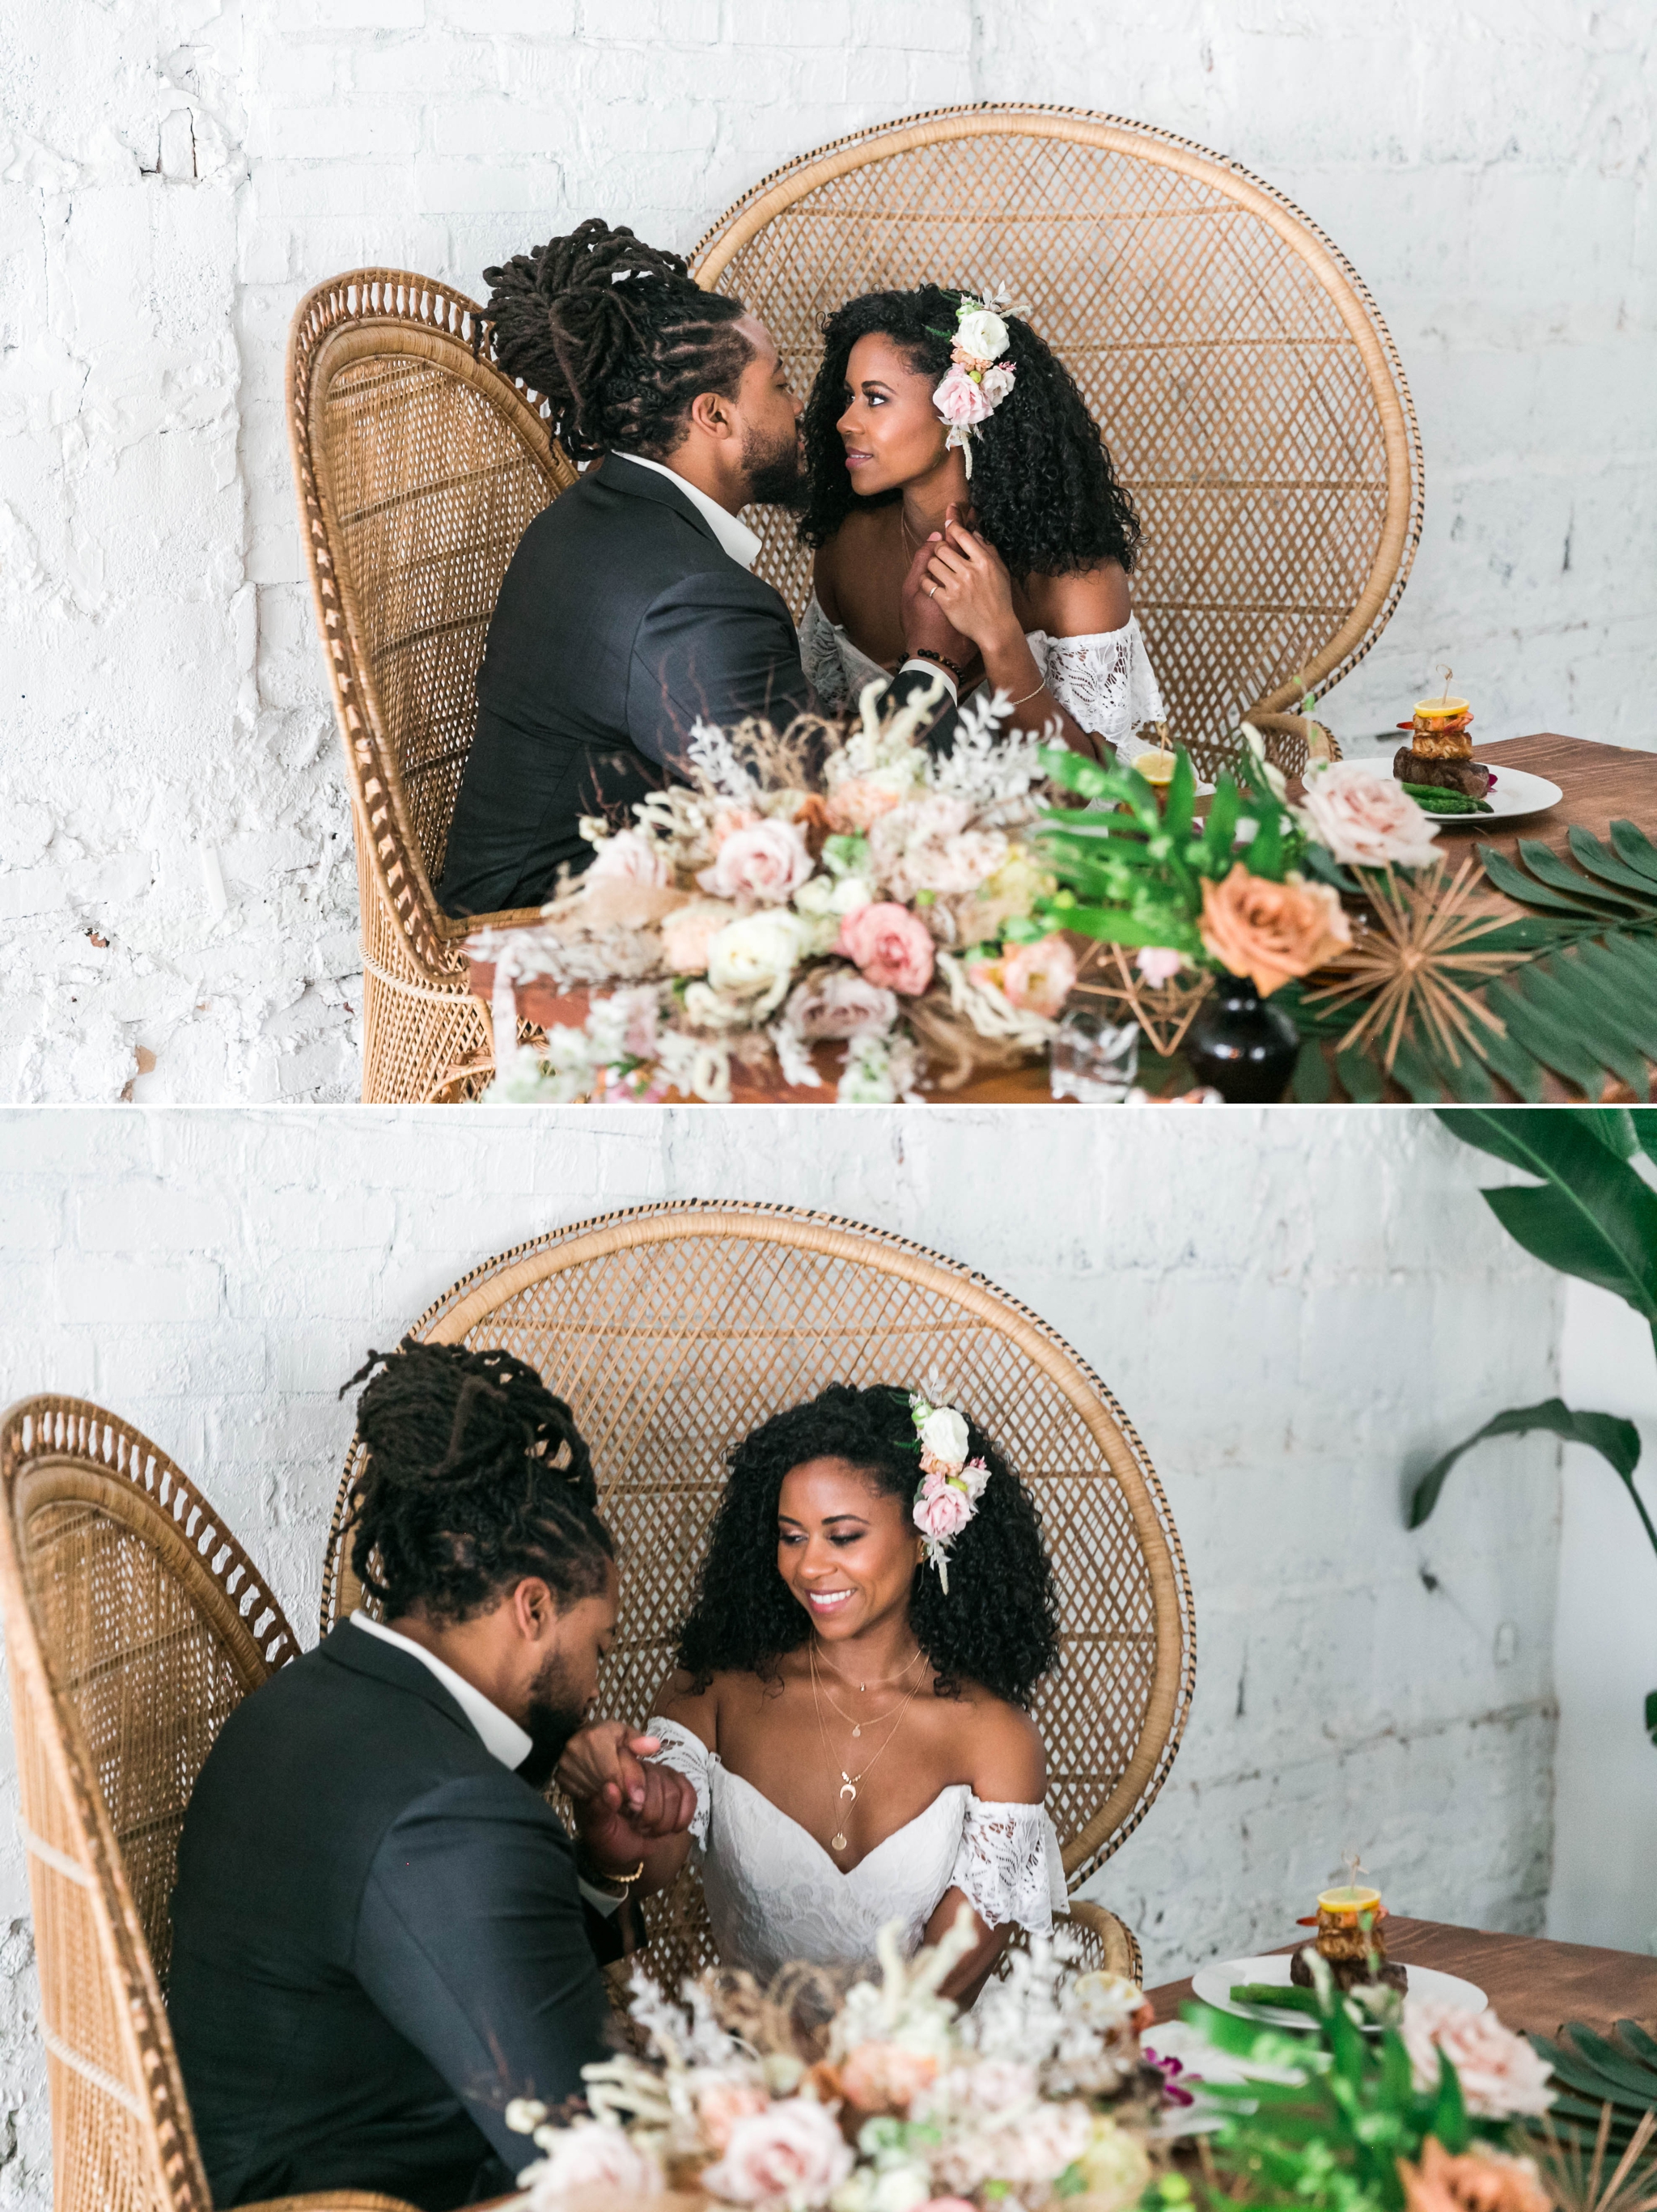  Bride and groom at the sweetheart table at their wedding reception sitting in Midcentury Woven Wicker Peacock Chairs - Black Love - Tropical Destination Wedding Inspiration - Oahu Hawaii Wedding Photography - indoor natural light photographer  